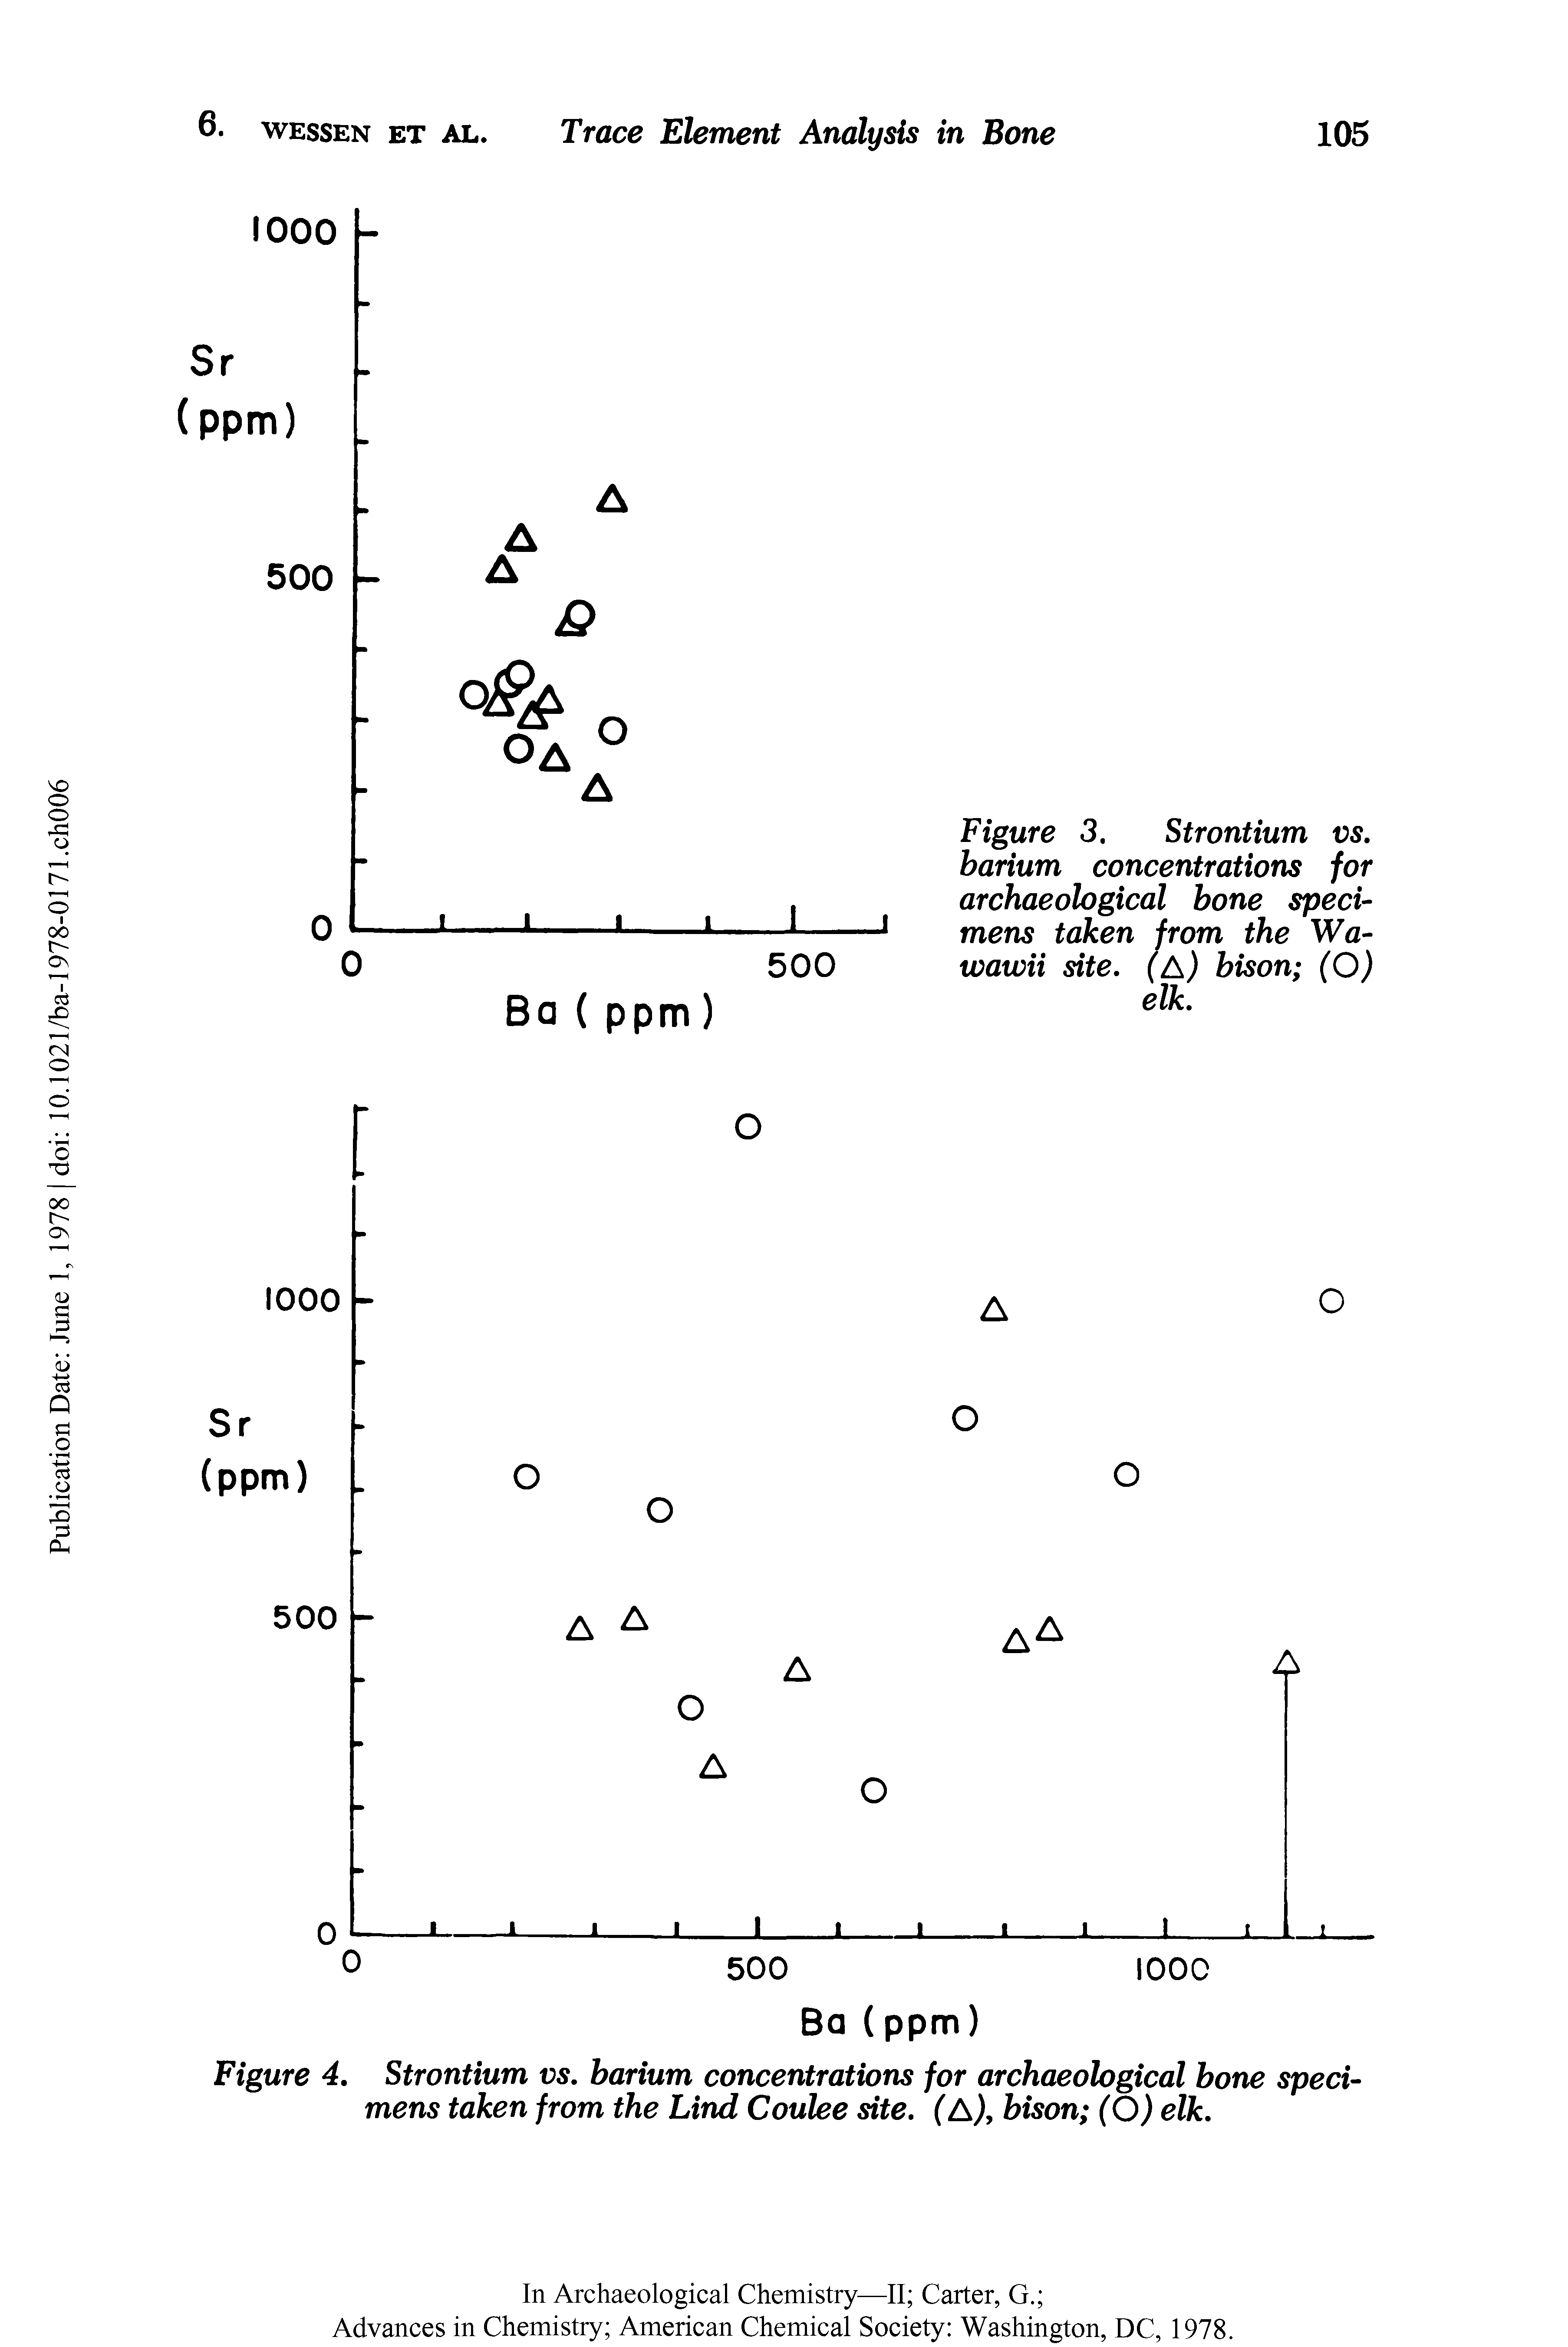 Figure 4. Strontium vs. barium concentrations for archaeological bone specimens taken from the Lind Coulee site. (A), bison (O) elk.